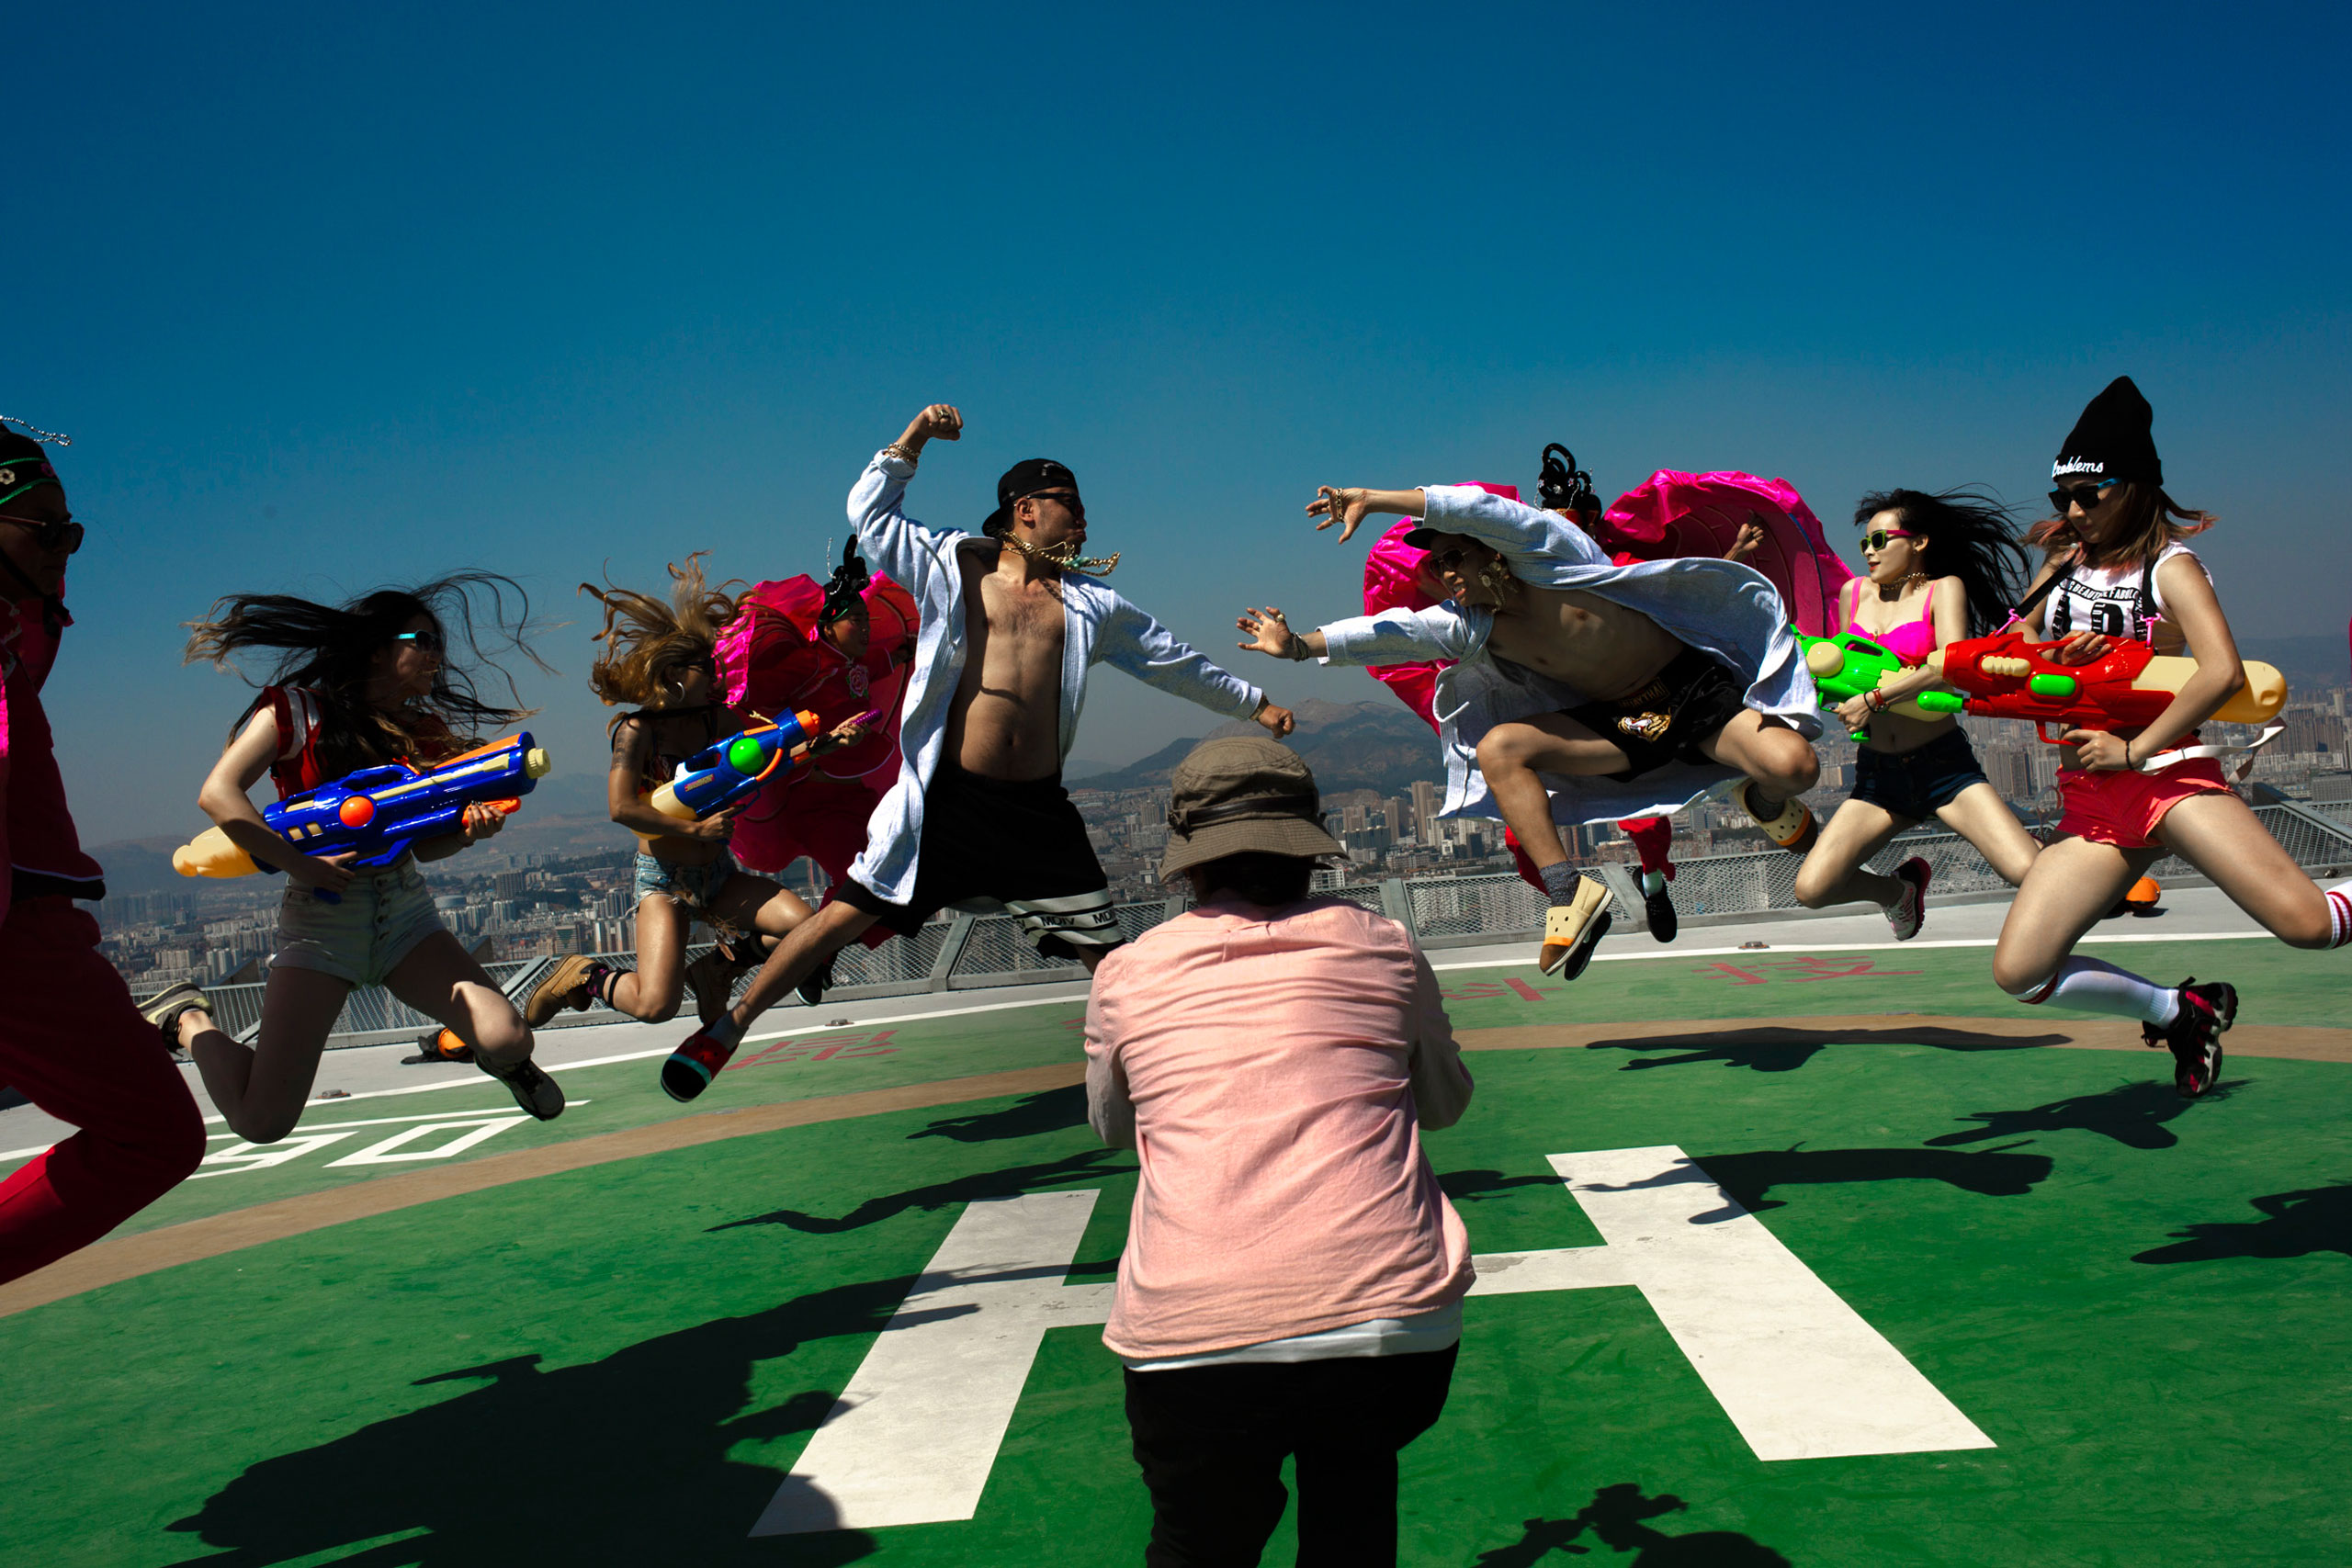 Dangsters, a hip-hop dance group based in Kunming, Yunnan Province, China, performs for a commercial video shoot, March 13, 2015.